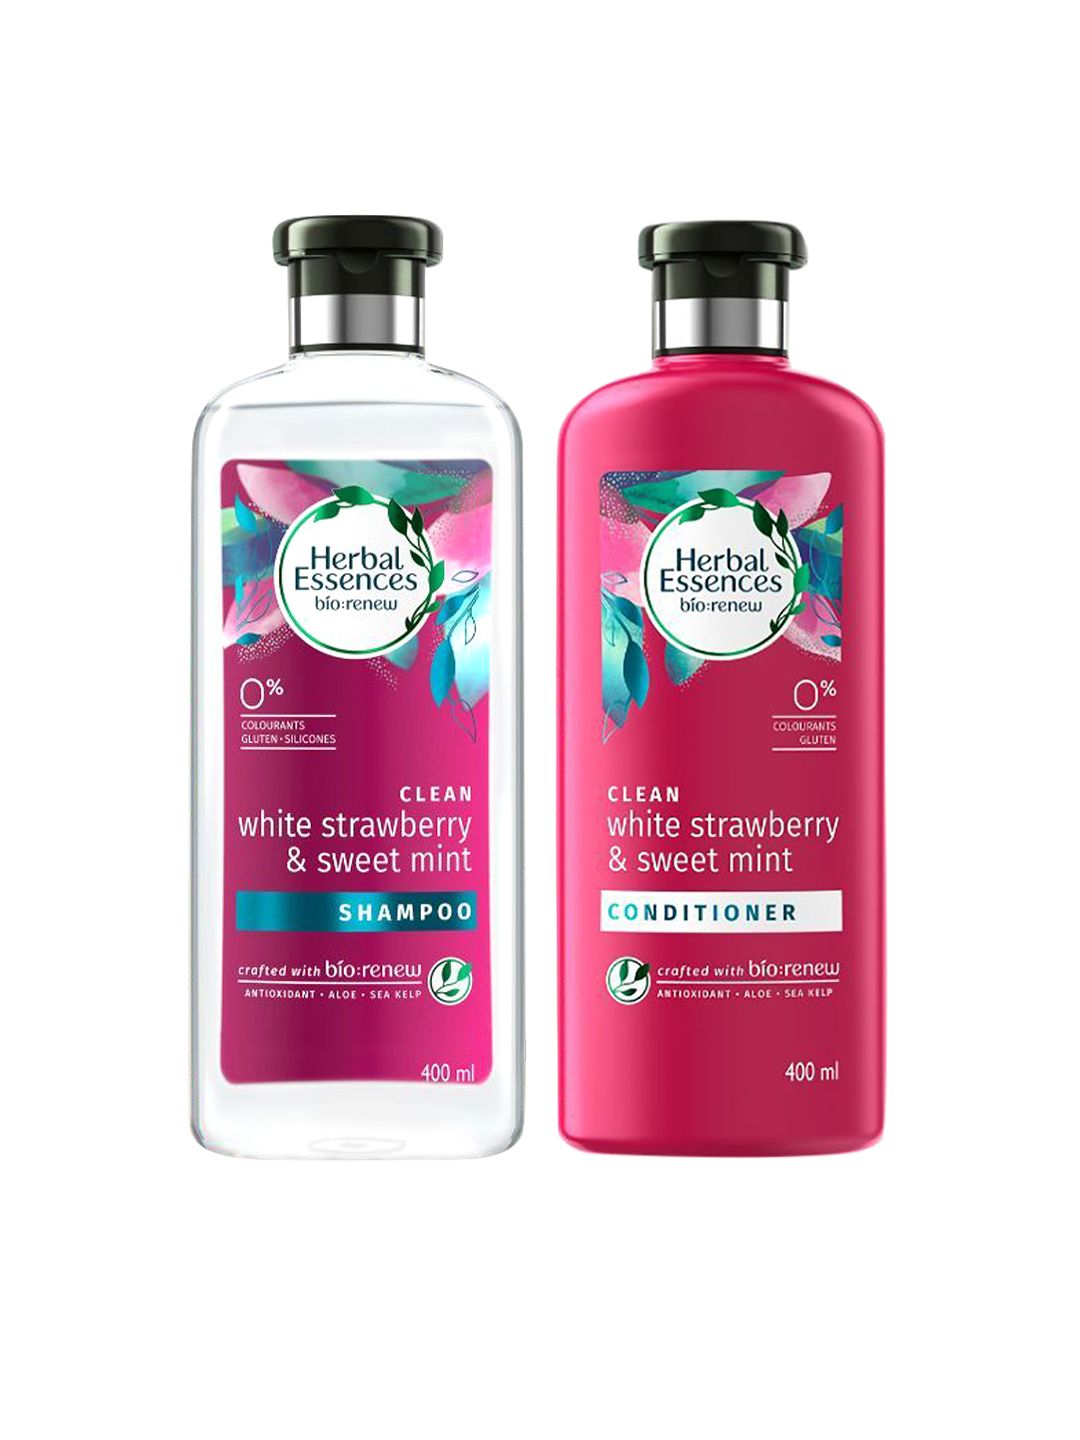 Herbal Essences Set of White Strawberry & Sweet Mint Shampoo & Conditioner Price in India